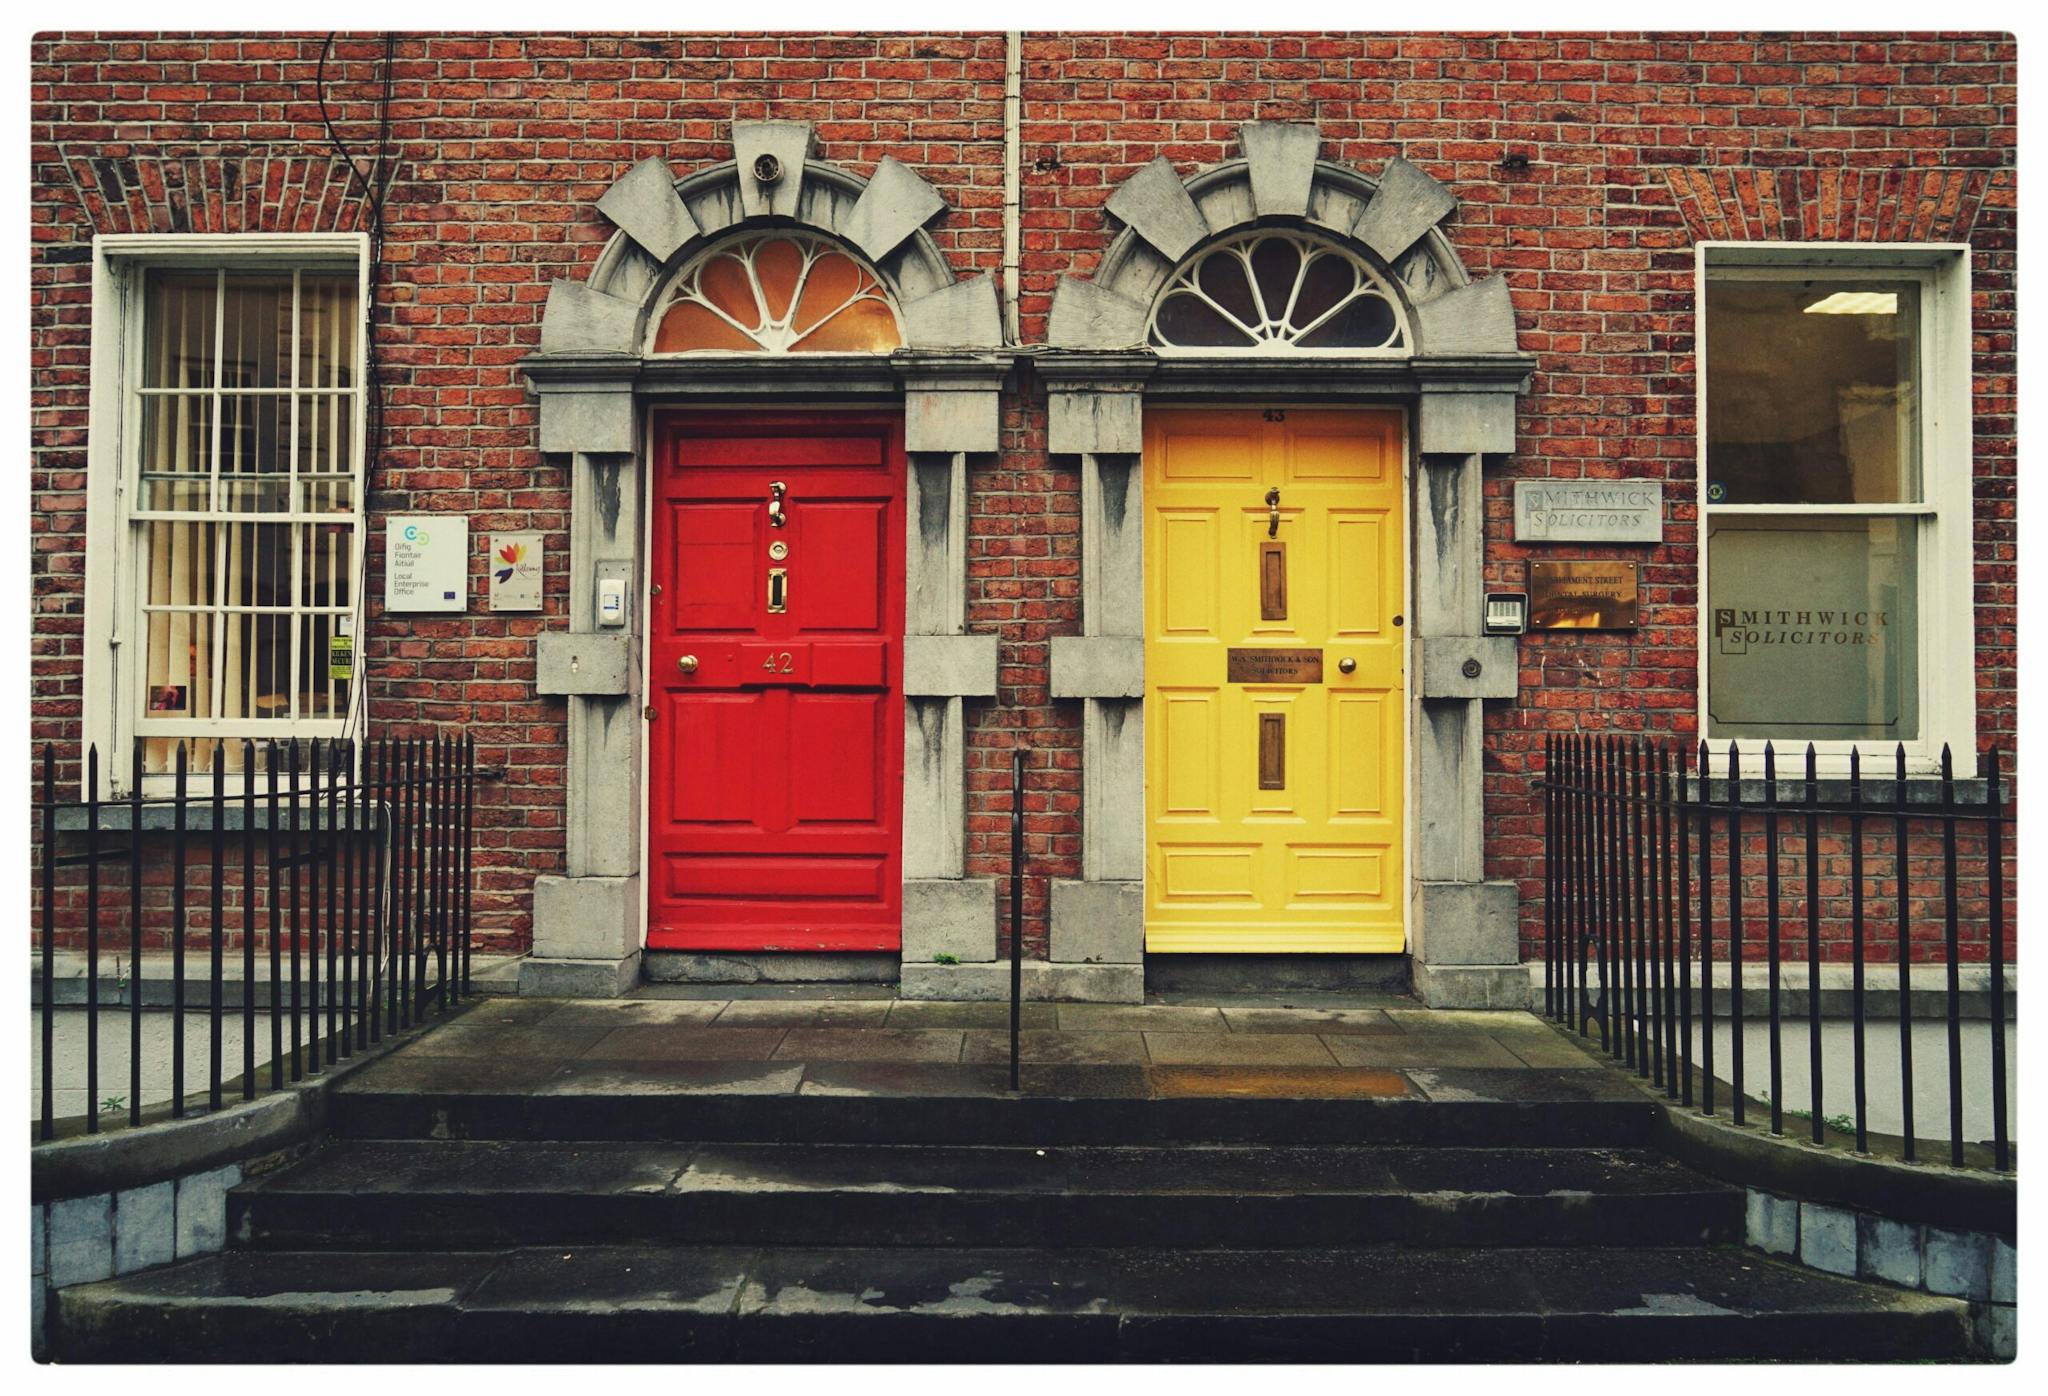 A vibrant pair of doors, one red and one yellow, beckoning with their contrasting hues and promising a world of possibilities beyond.